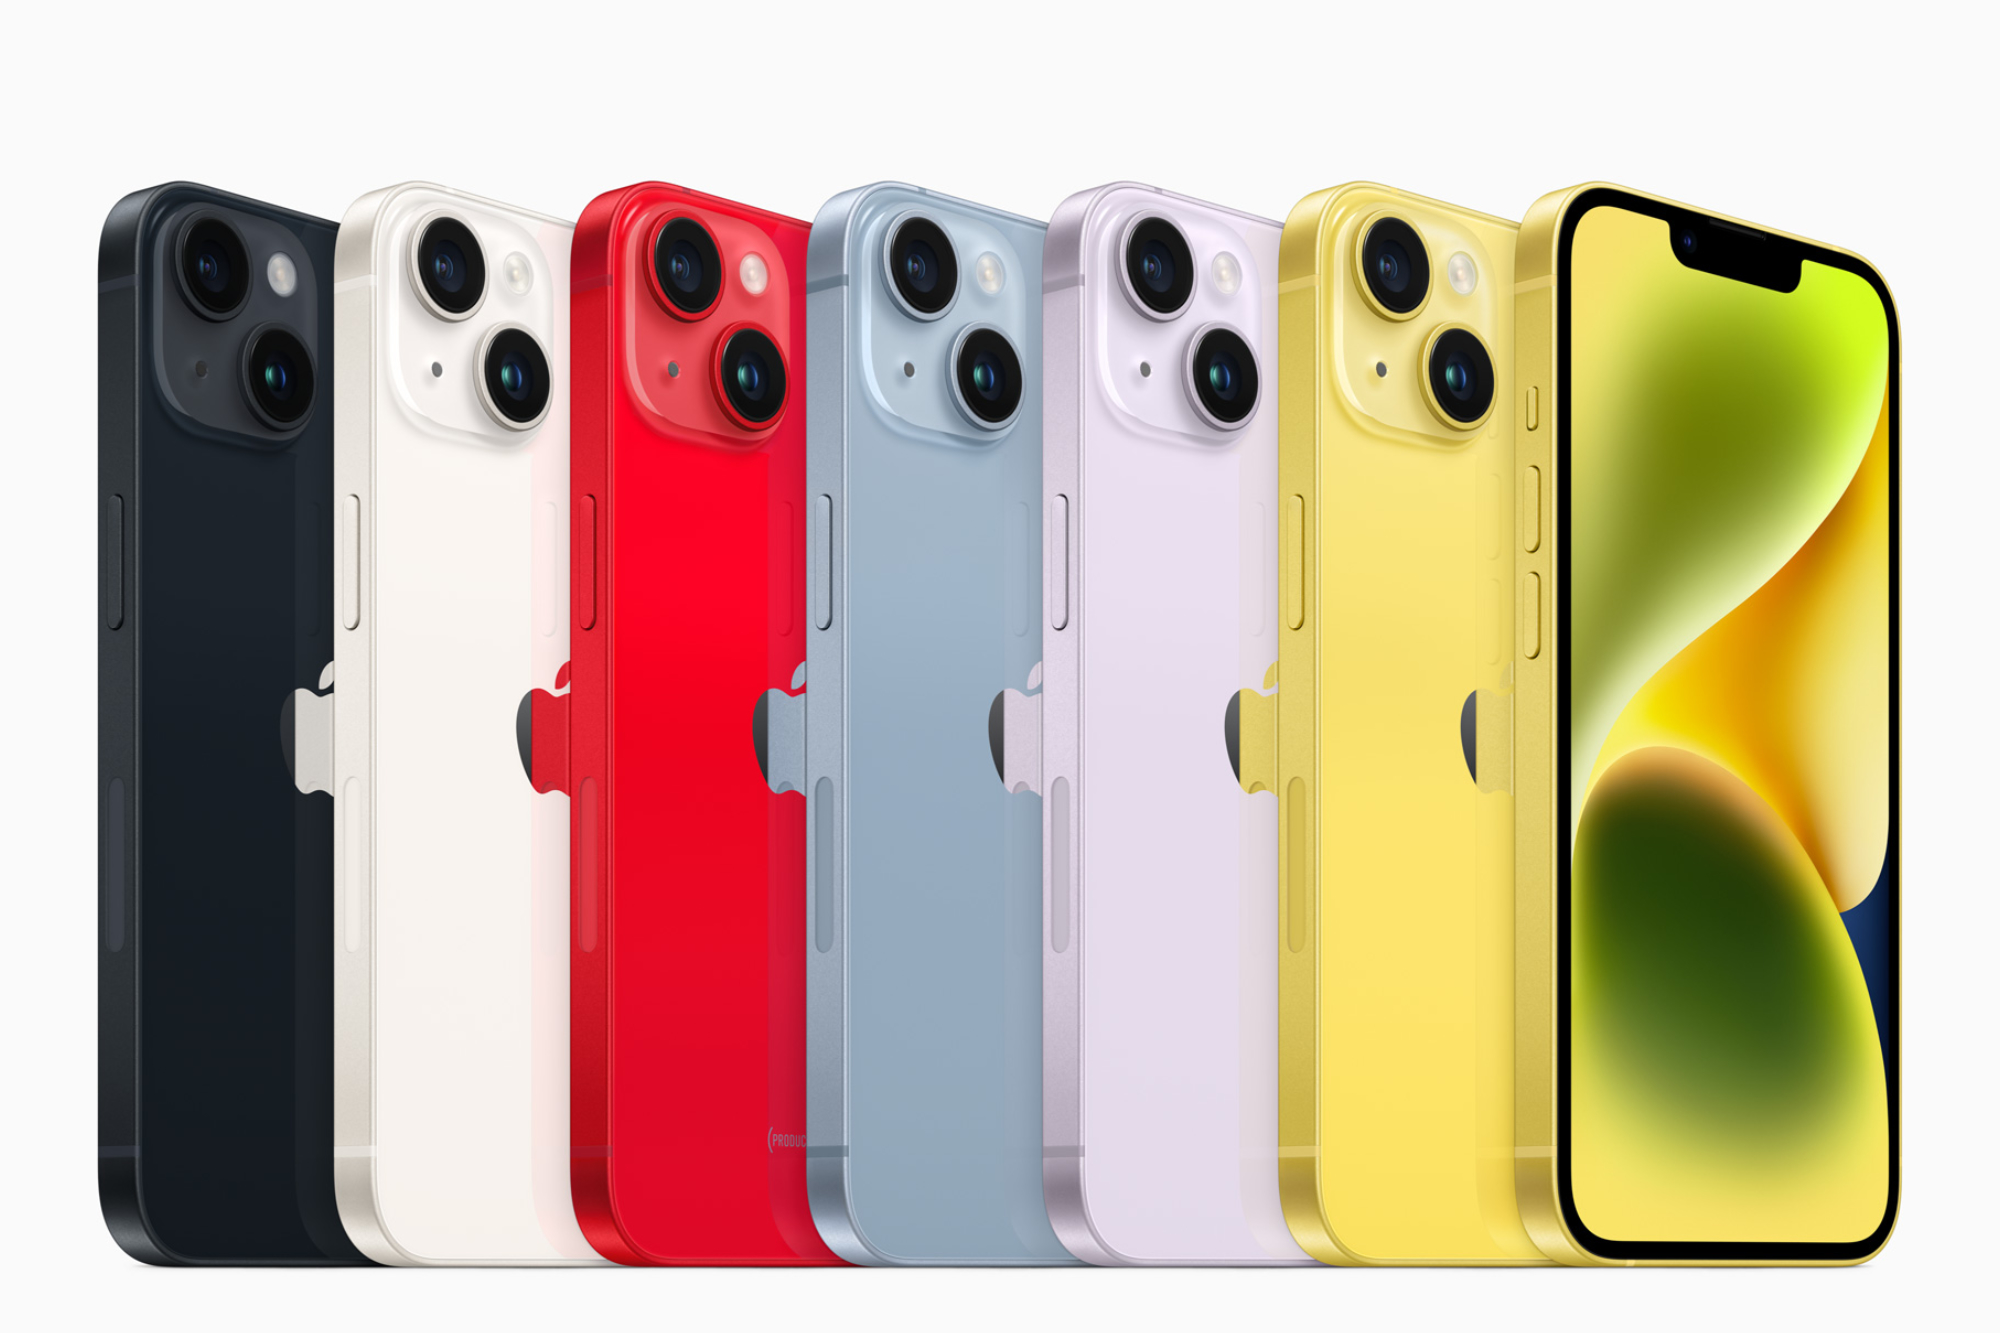 The iPhone 14 in all available colors, including yellow.